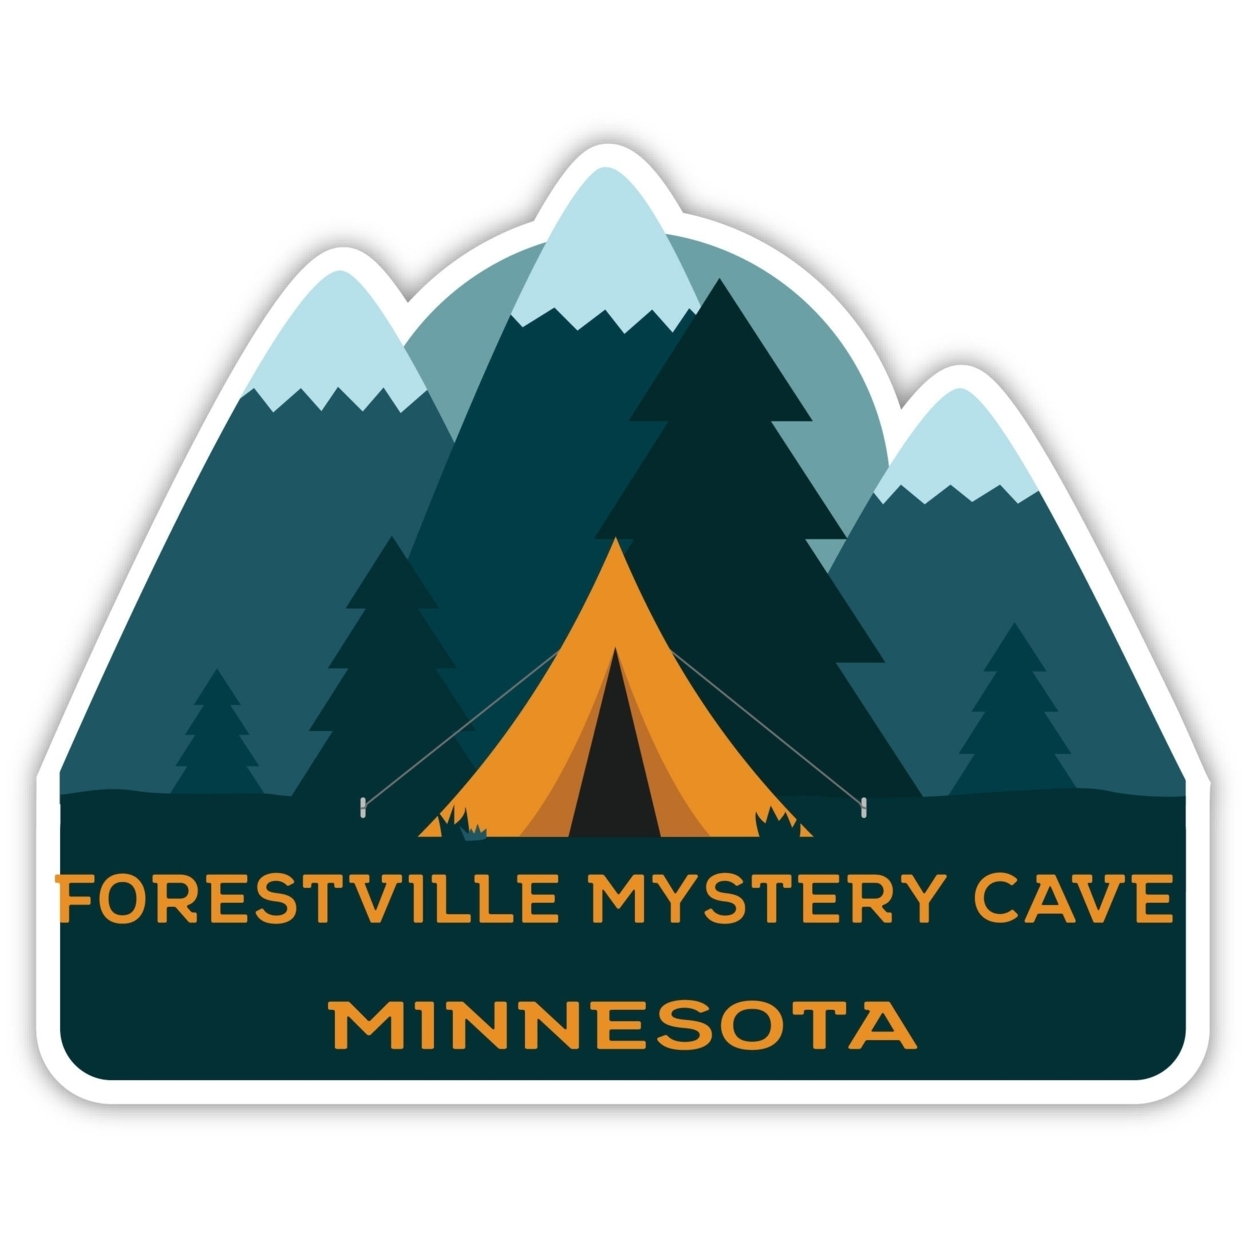 Forestville Mystery Cave Minnesota Souvenir Decorative Stickers (Choose Theme And Size) - Single Unit, 10-Inch, Tent